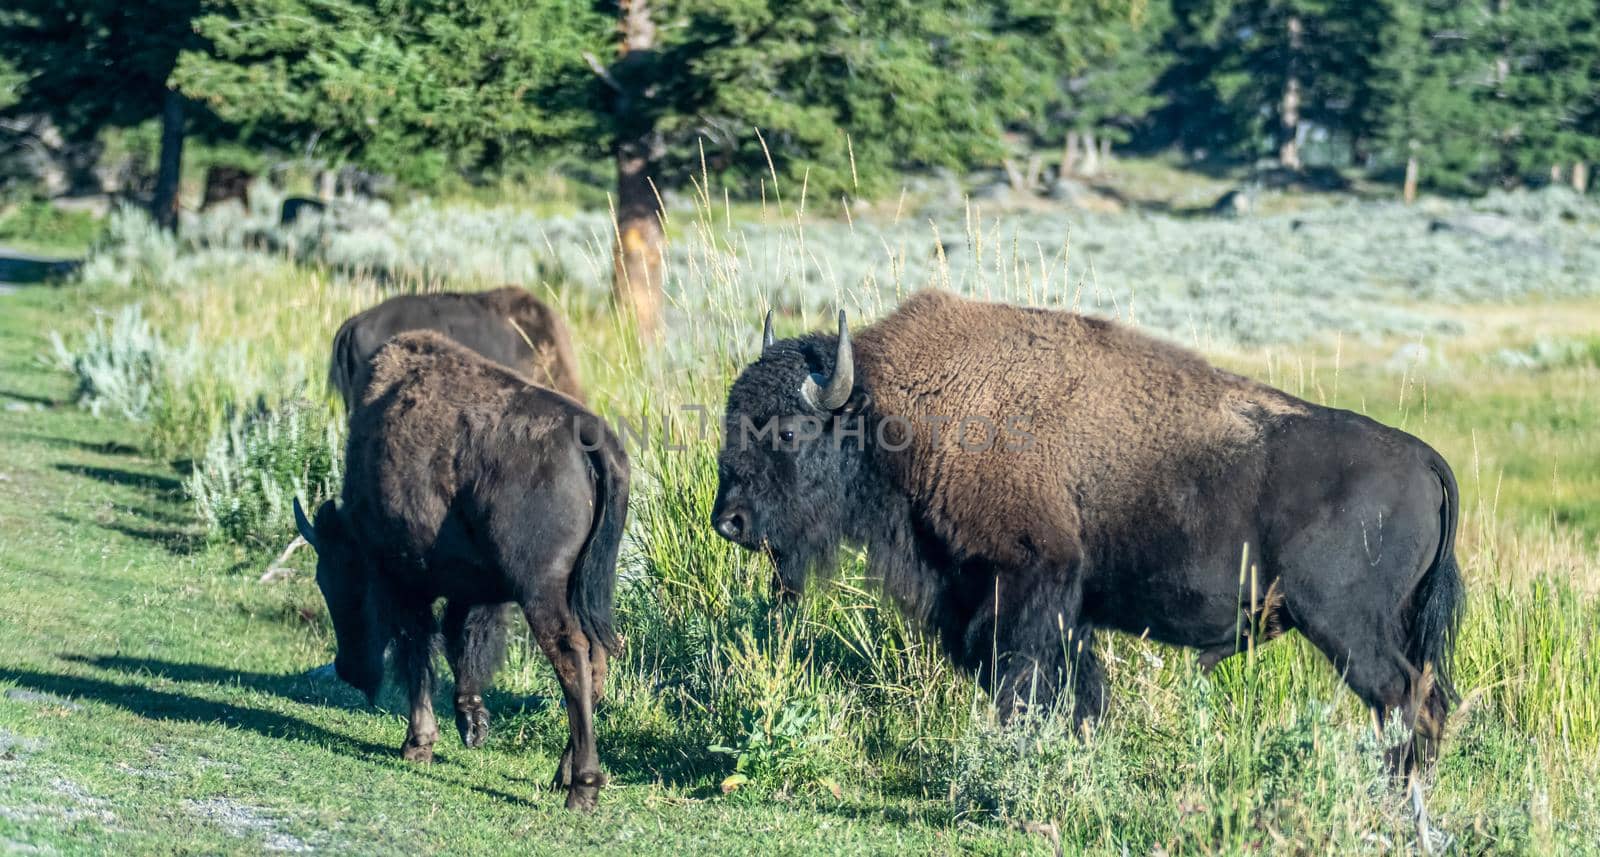 yeallowstone national park bison grazing at day light by digidreamgrafix